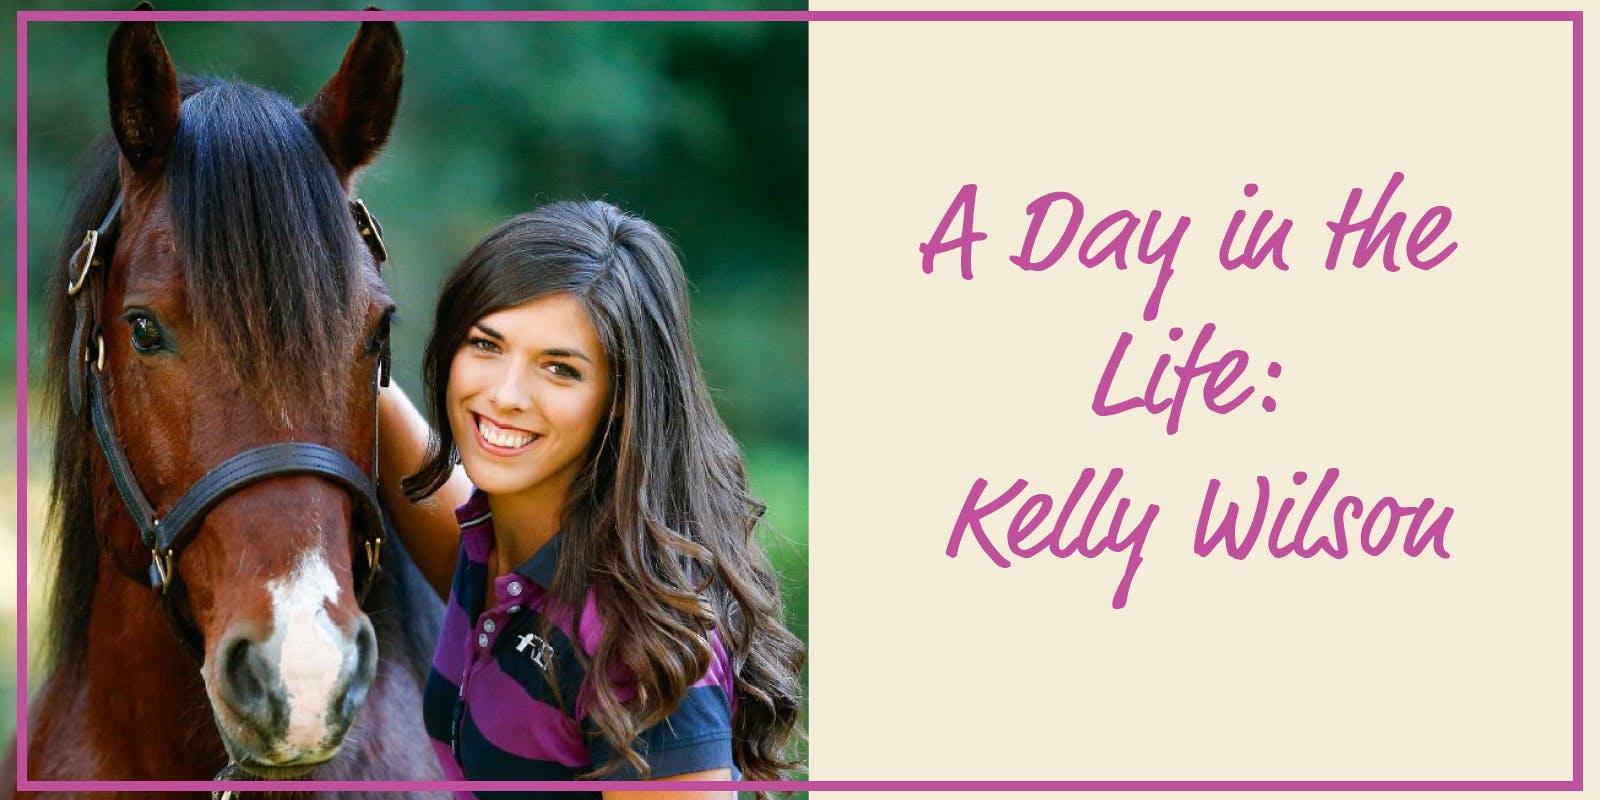 A day in the life: Kelly Wilson